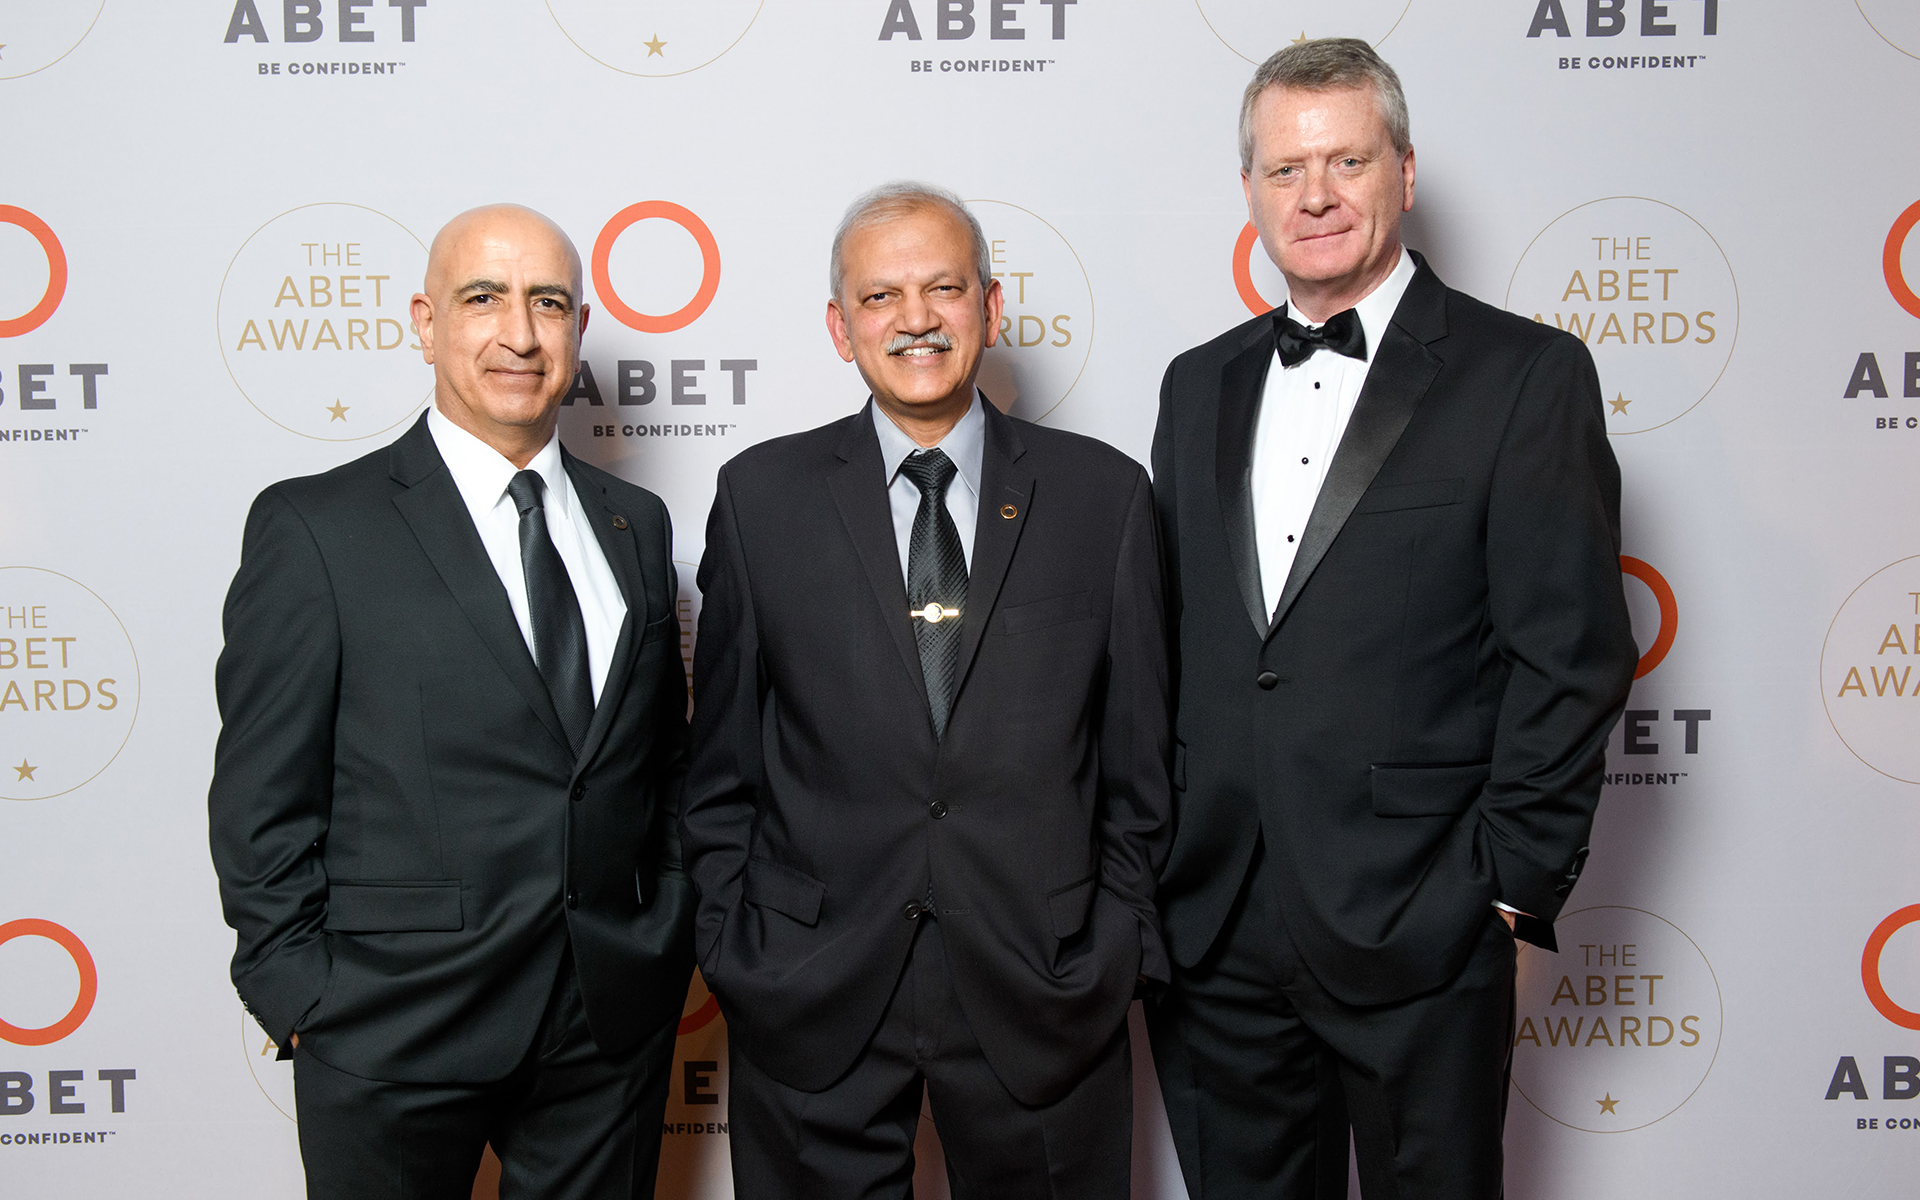 Three men in suits standing together at the ABET Awards